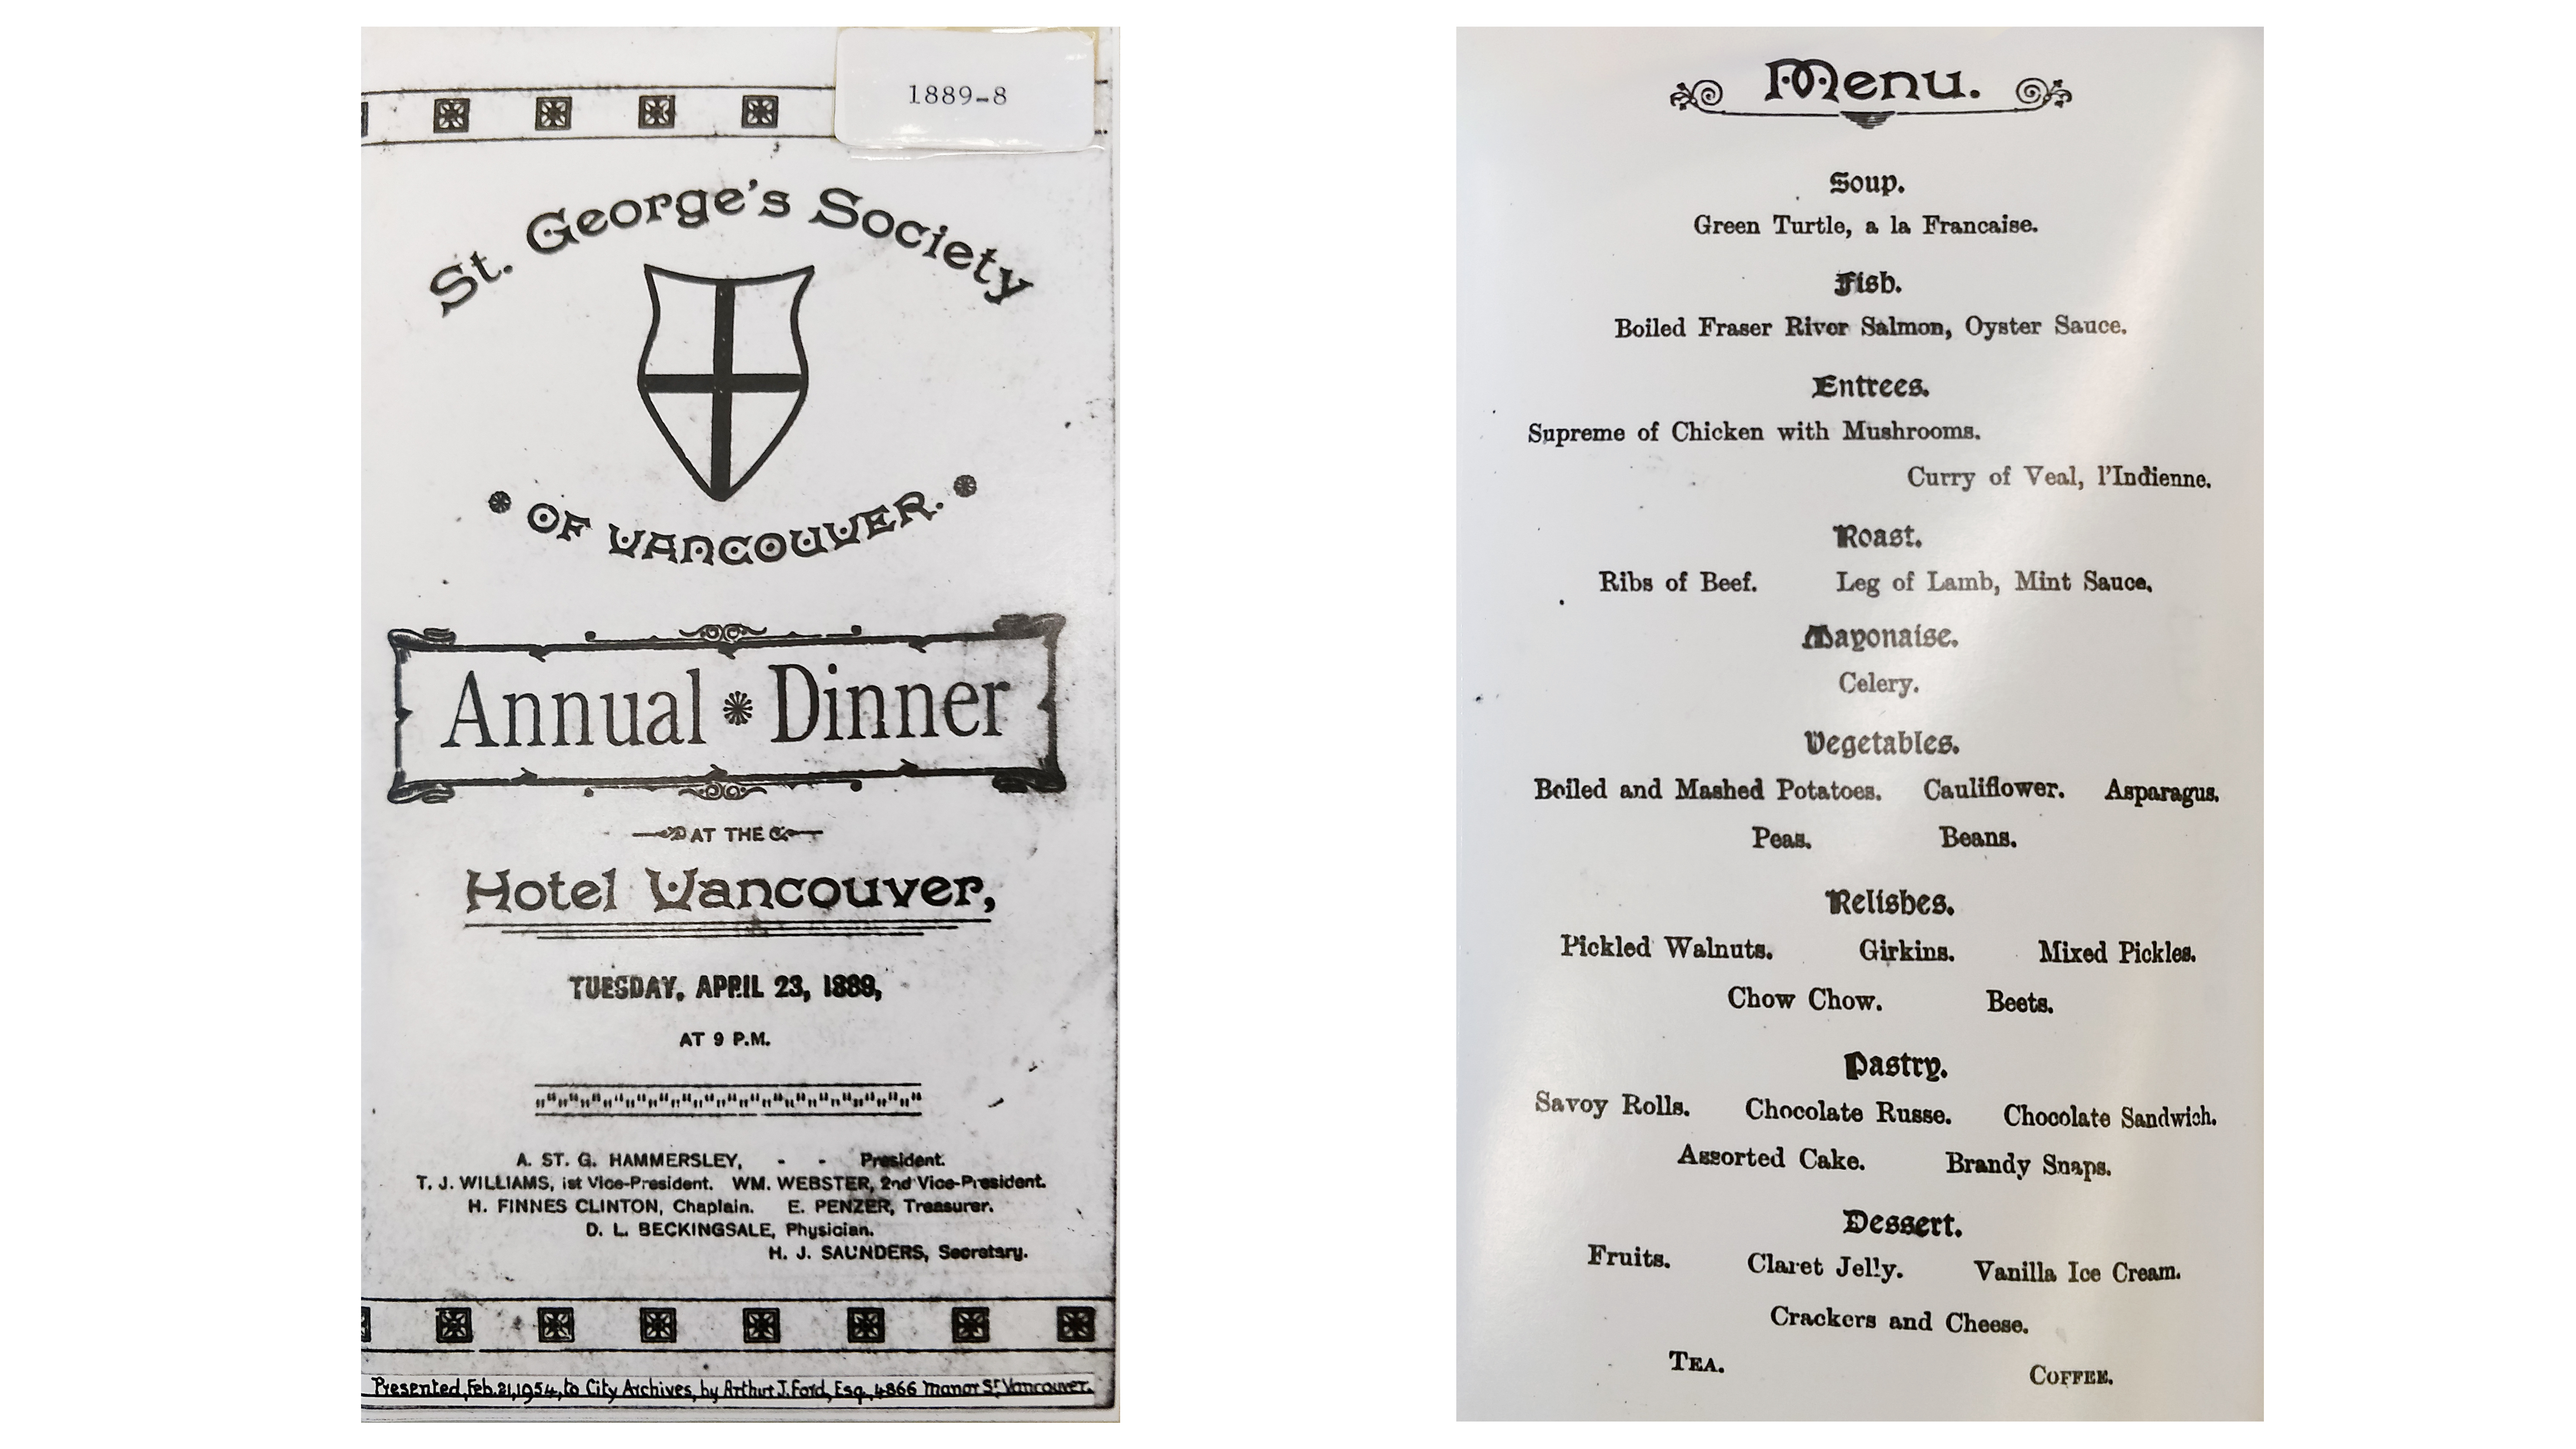 A menu from the St. George's Society of Vancouver annual dinner, hosted on April 23, 1886.